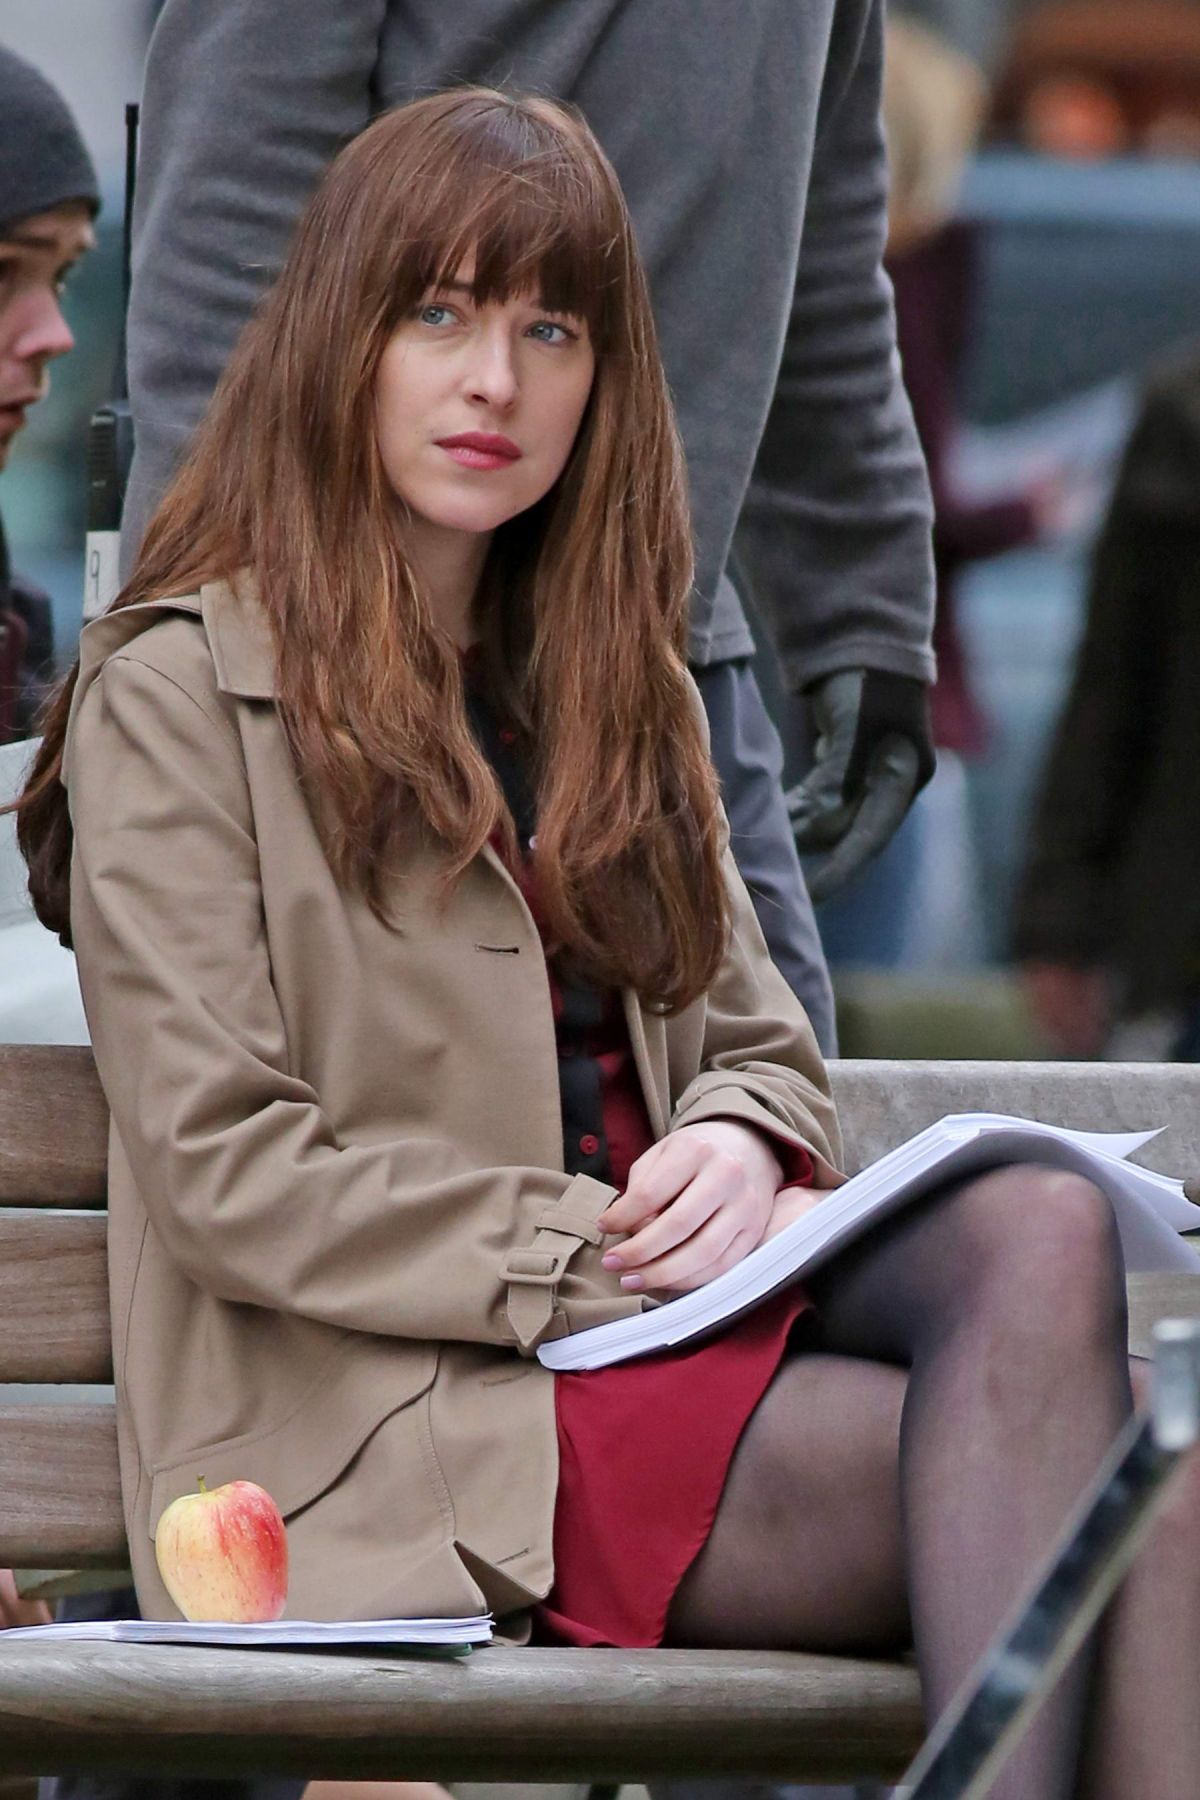 dakota-johnson-on-the-set-of-fifty-shades-darker-in-vancouver-03-14-2016_4.